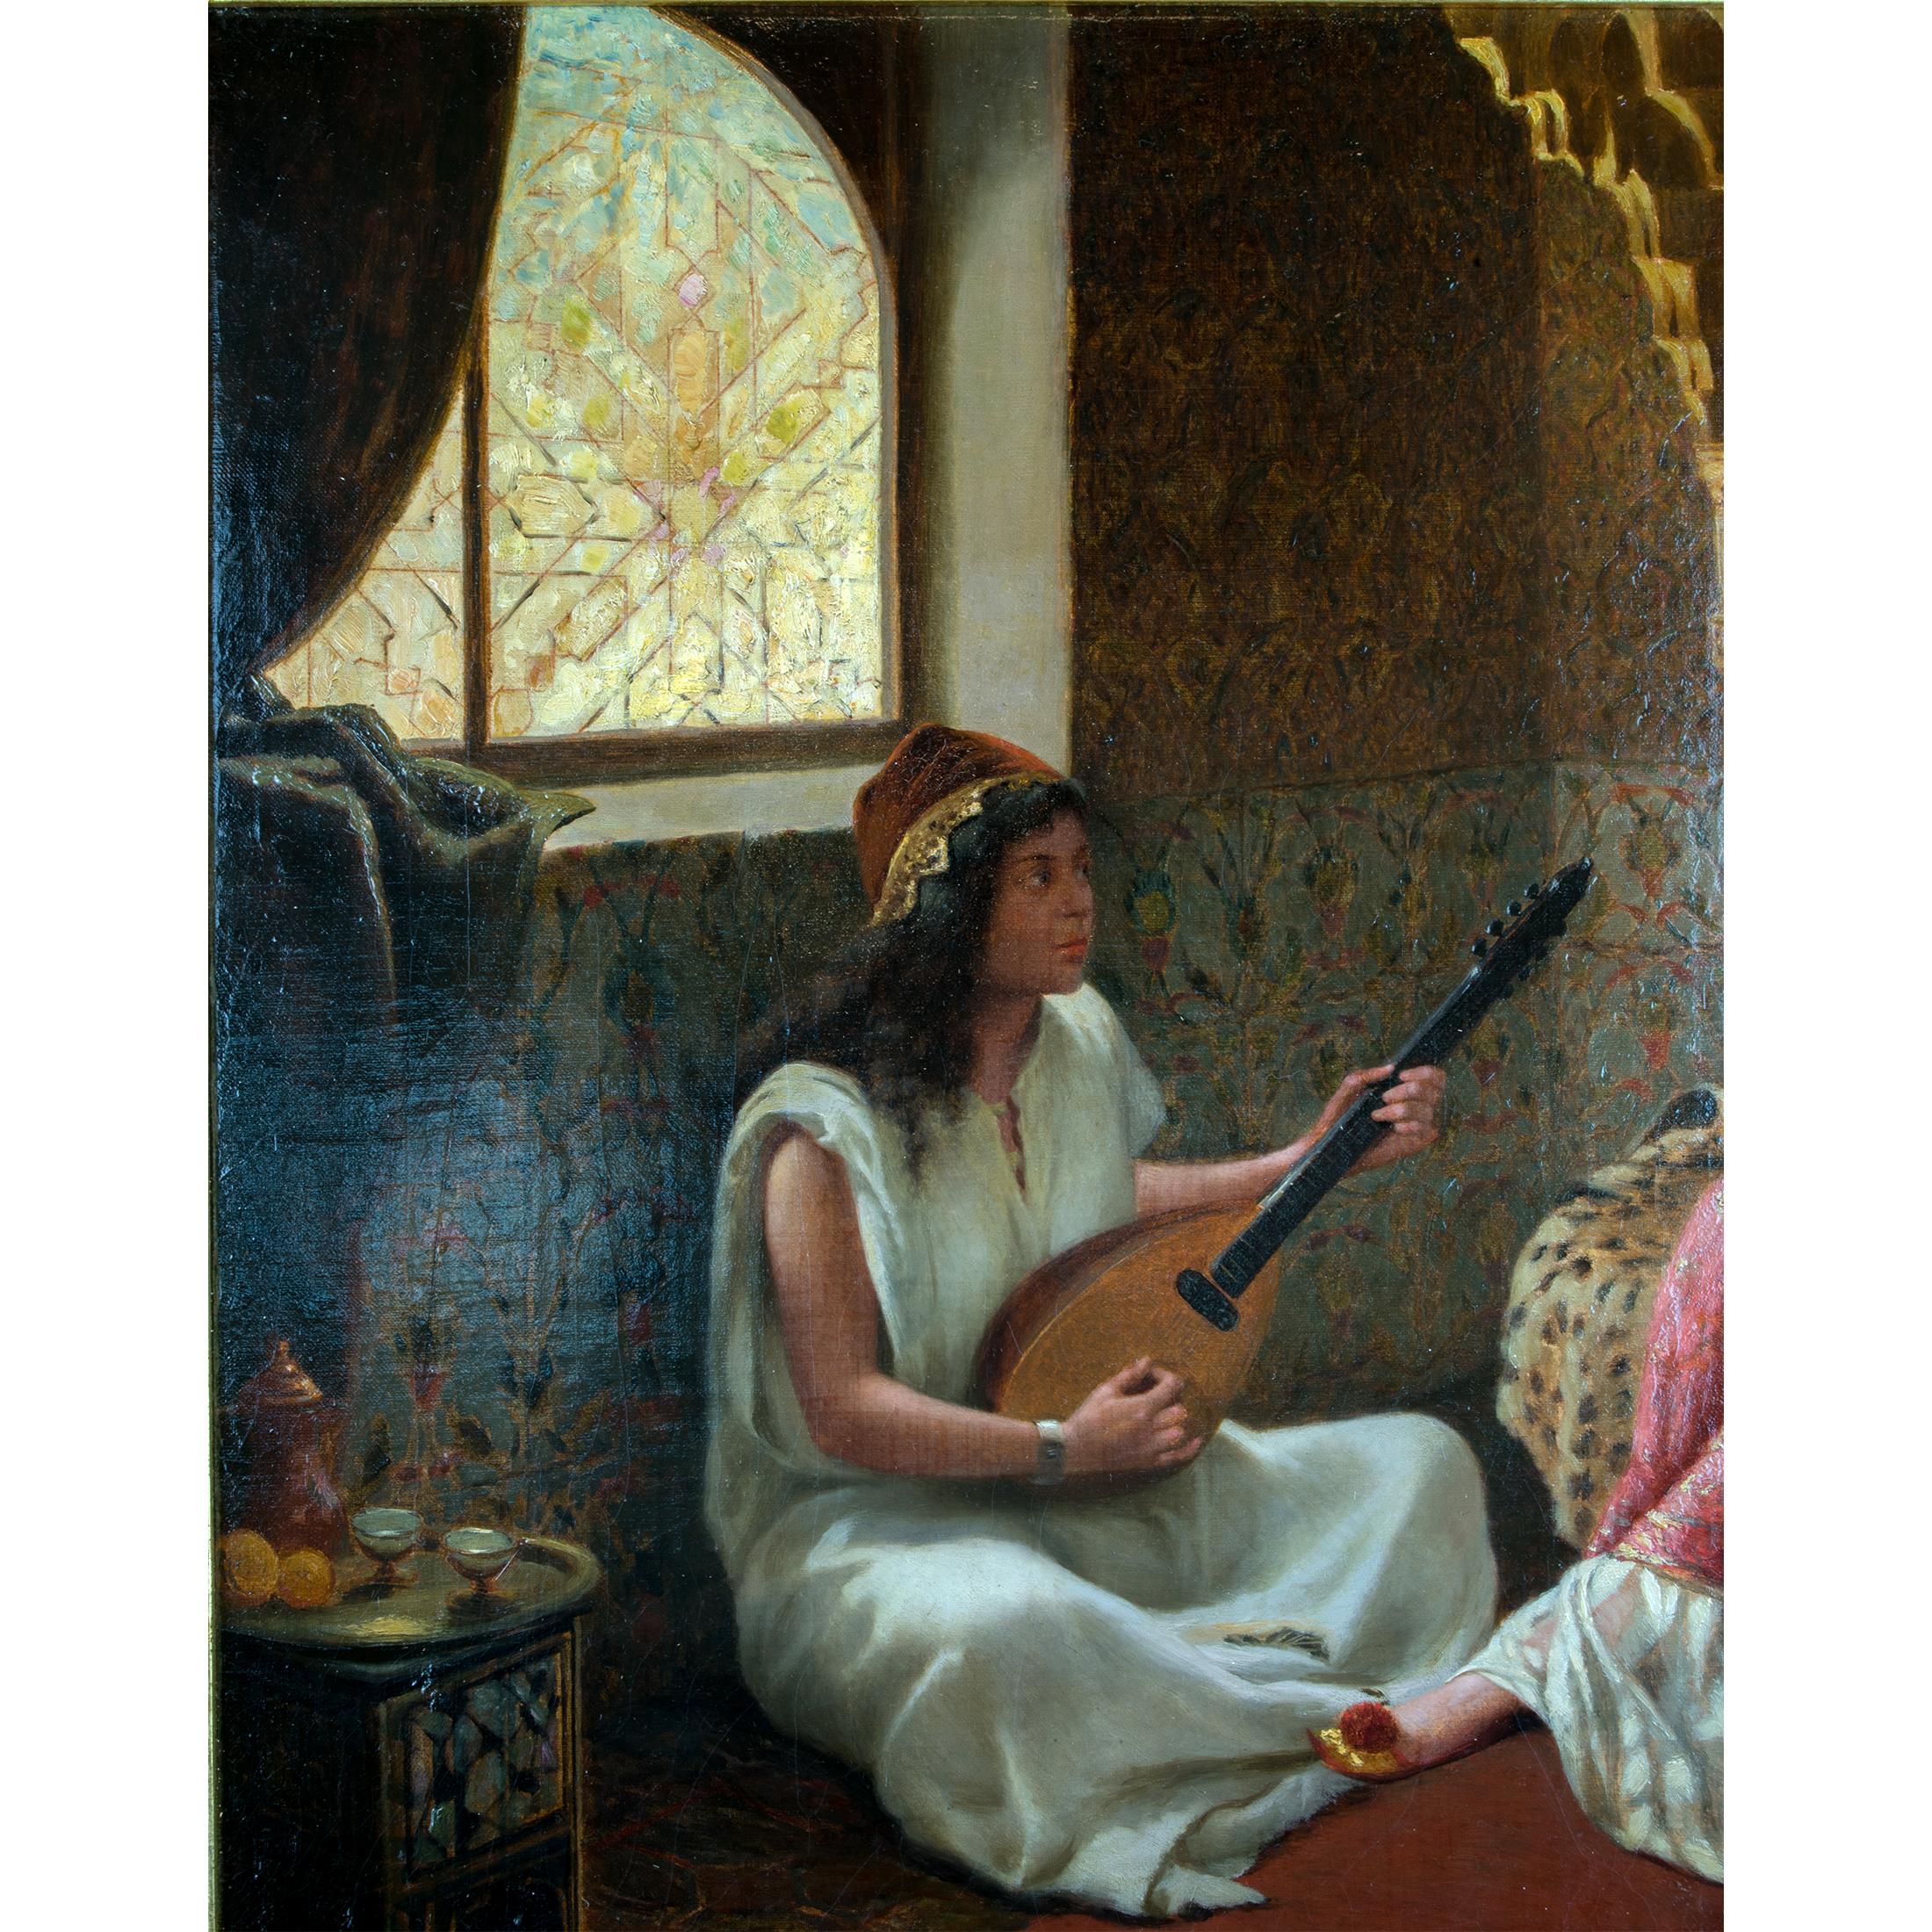 VINCENT G. STIEPEVICH
Russian, 1841-1910

Lounging Odalisque in the Harem 

Signed ‘VG. Stiepevich’ L/R  

Oil on canvas
18 x 24 inches
Frame: 26 x 33 inches